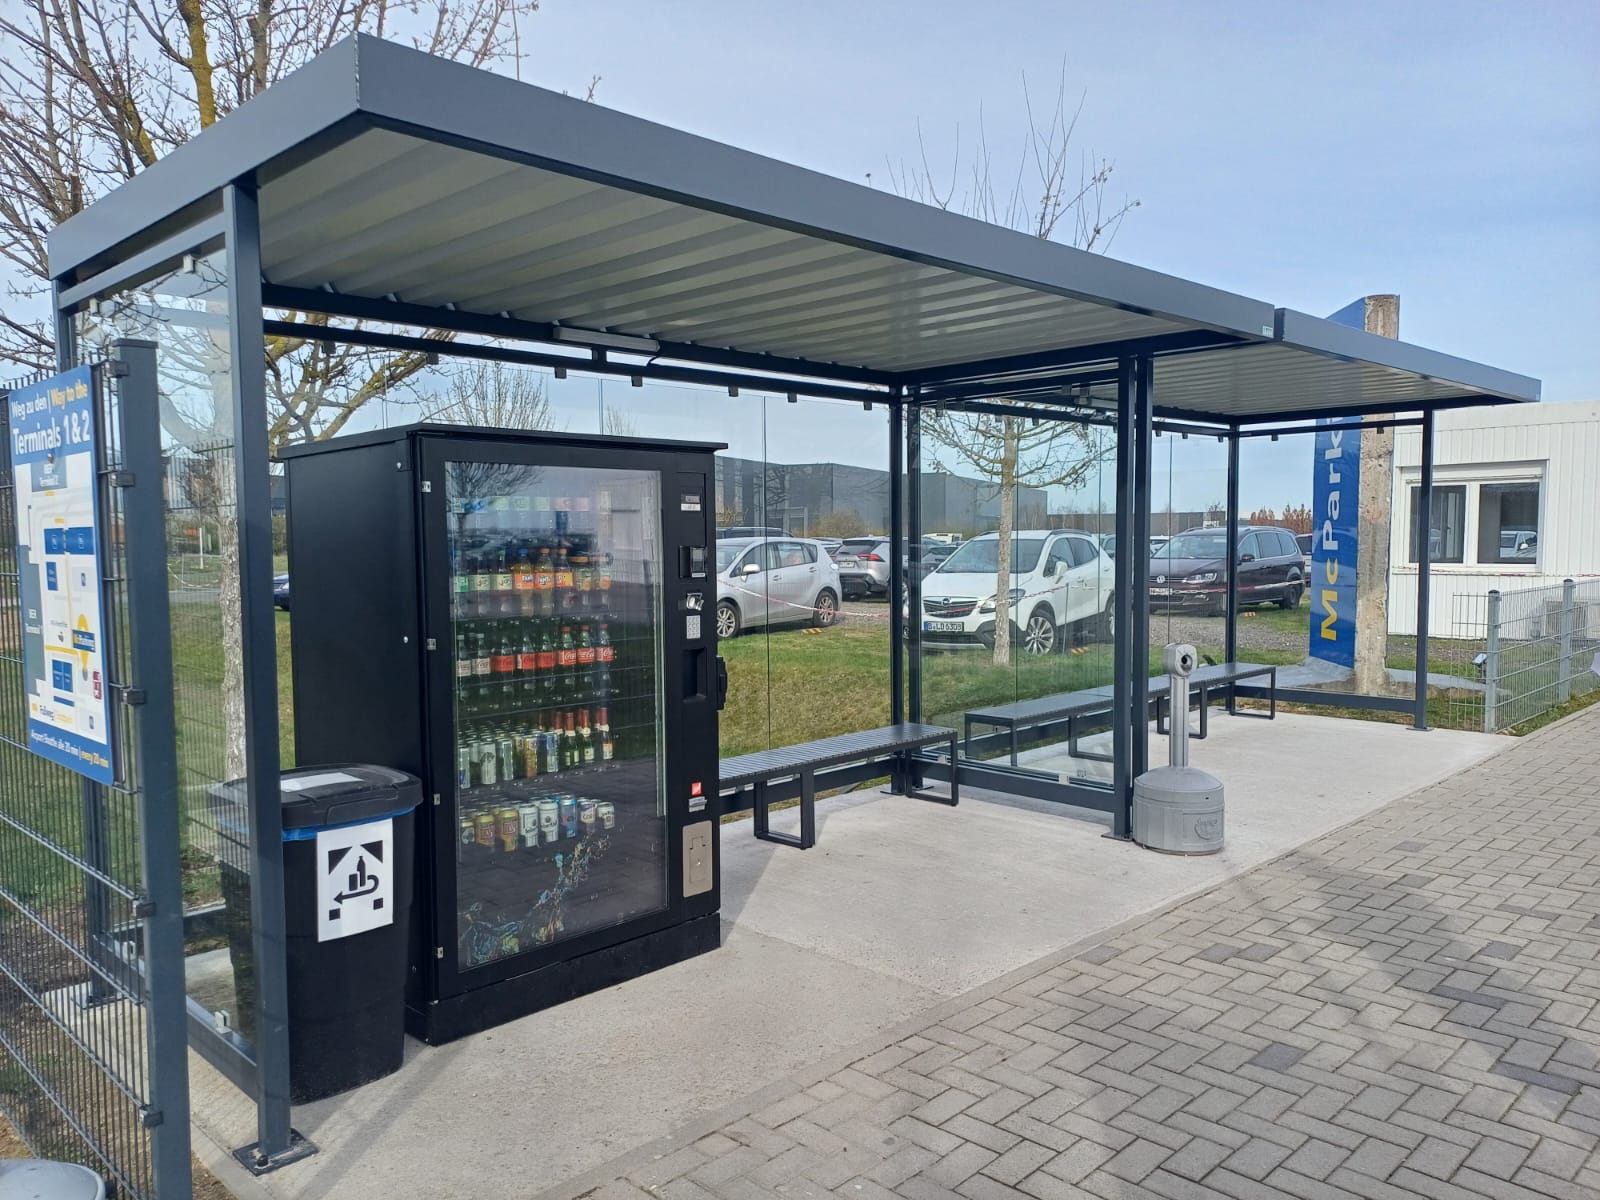 McParking's covered waiting area with vending machines